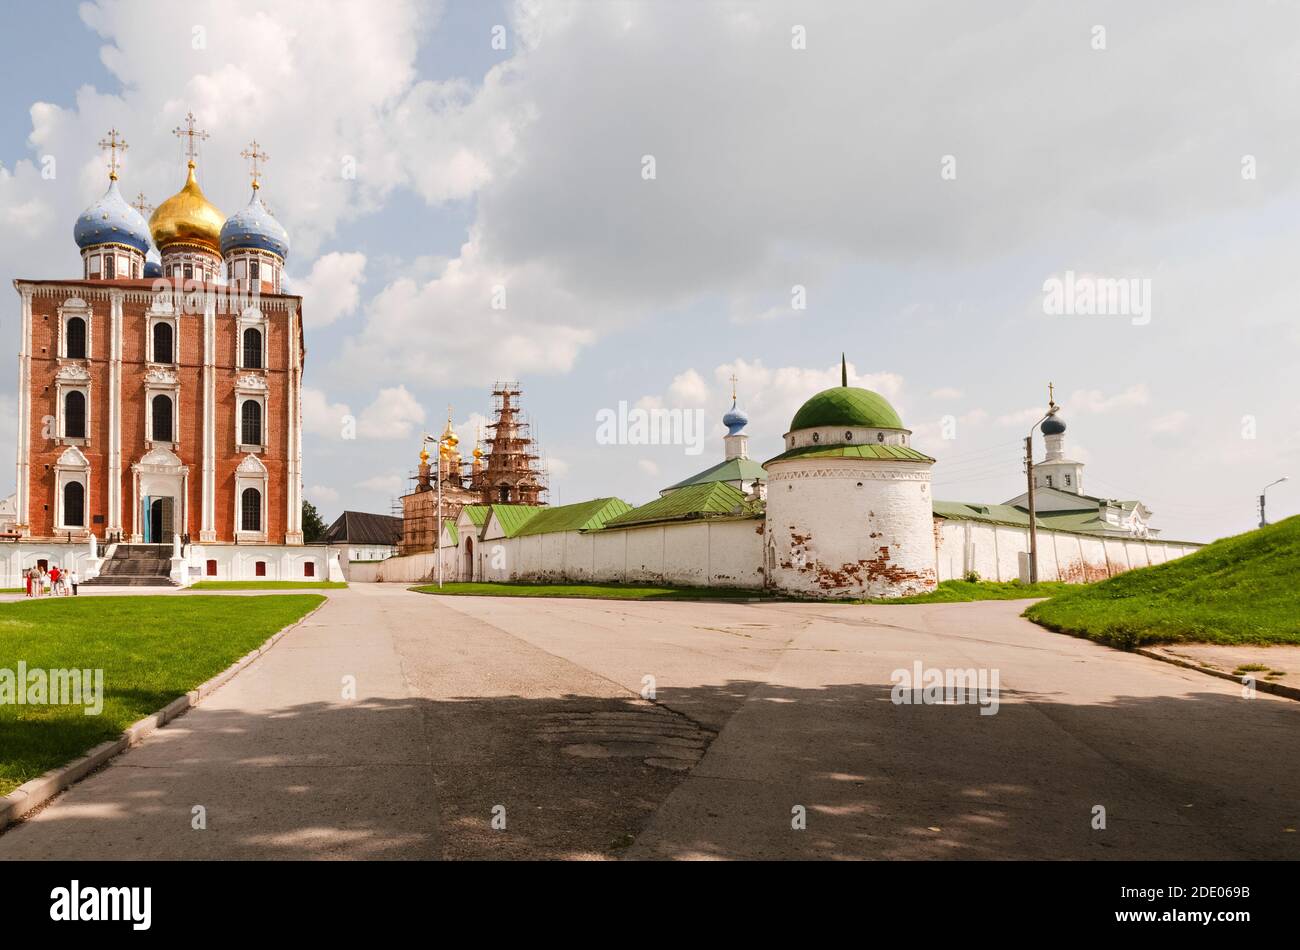 View of the cathedrals and walls of the Ryazan Kremlin. Ryazan, Russia Stock Photo